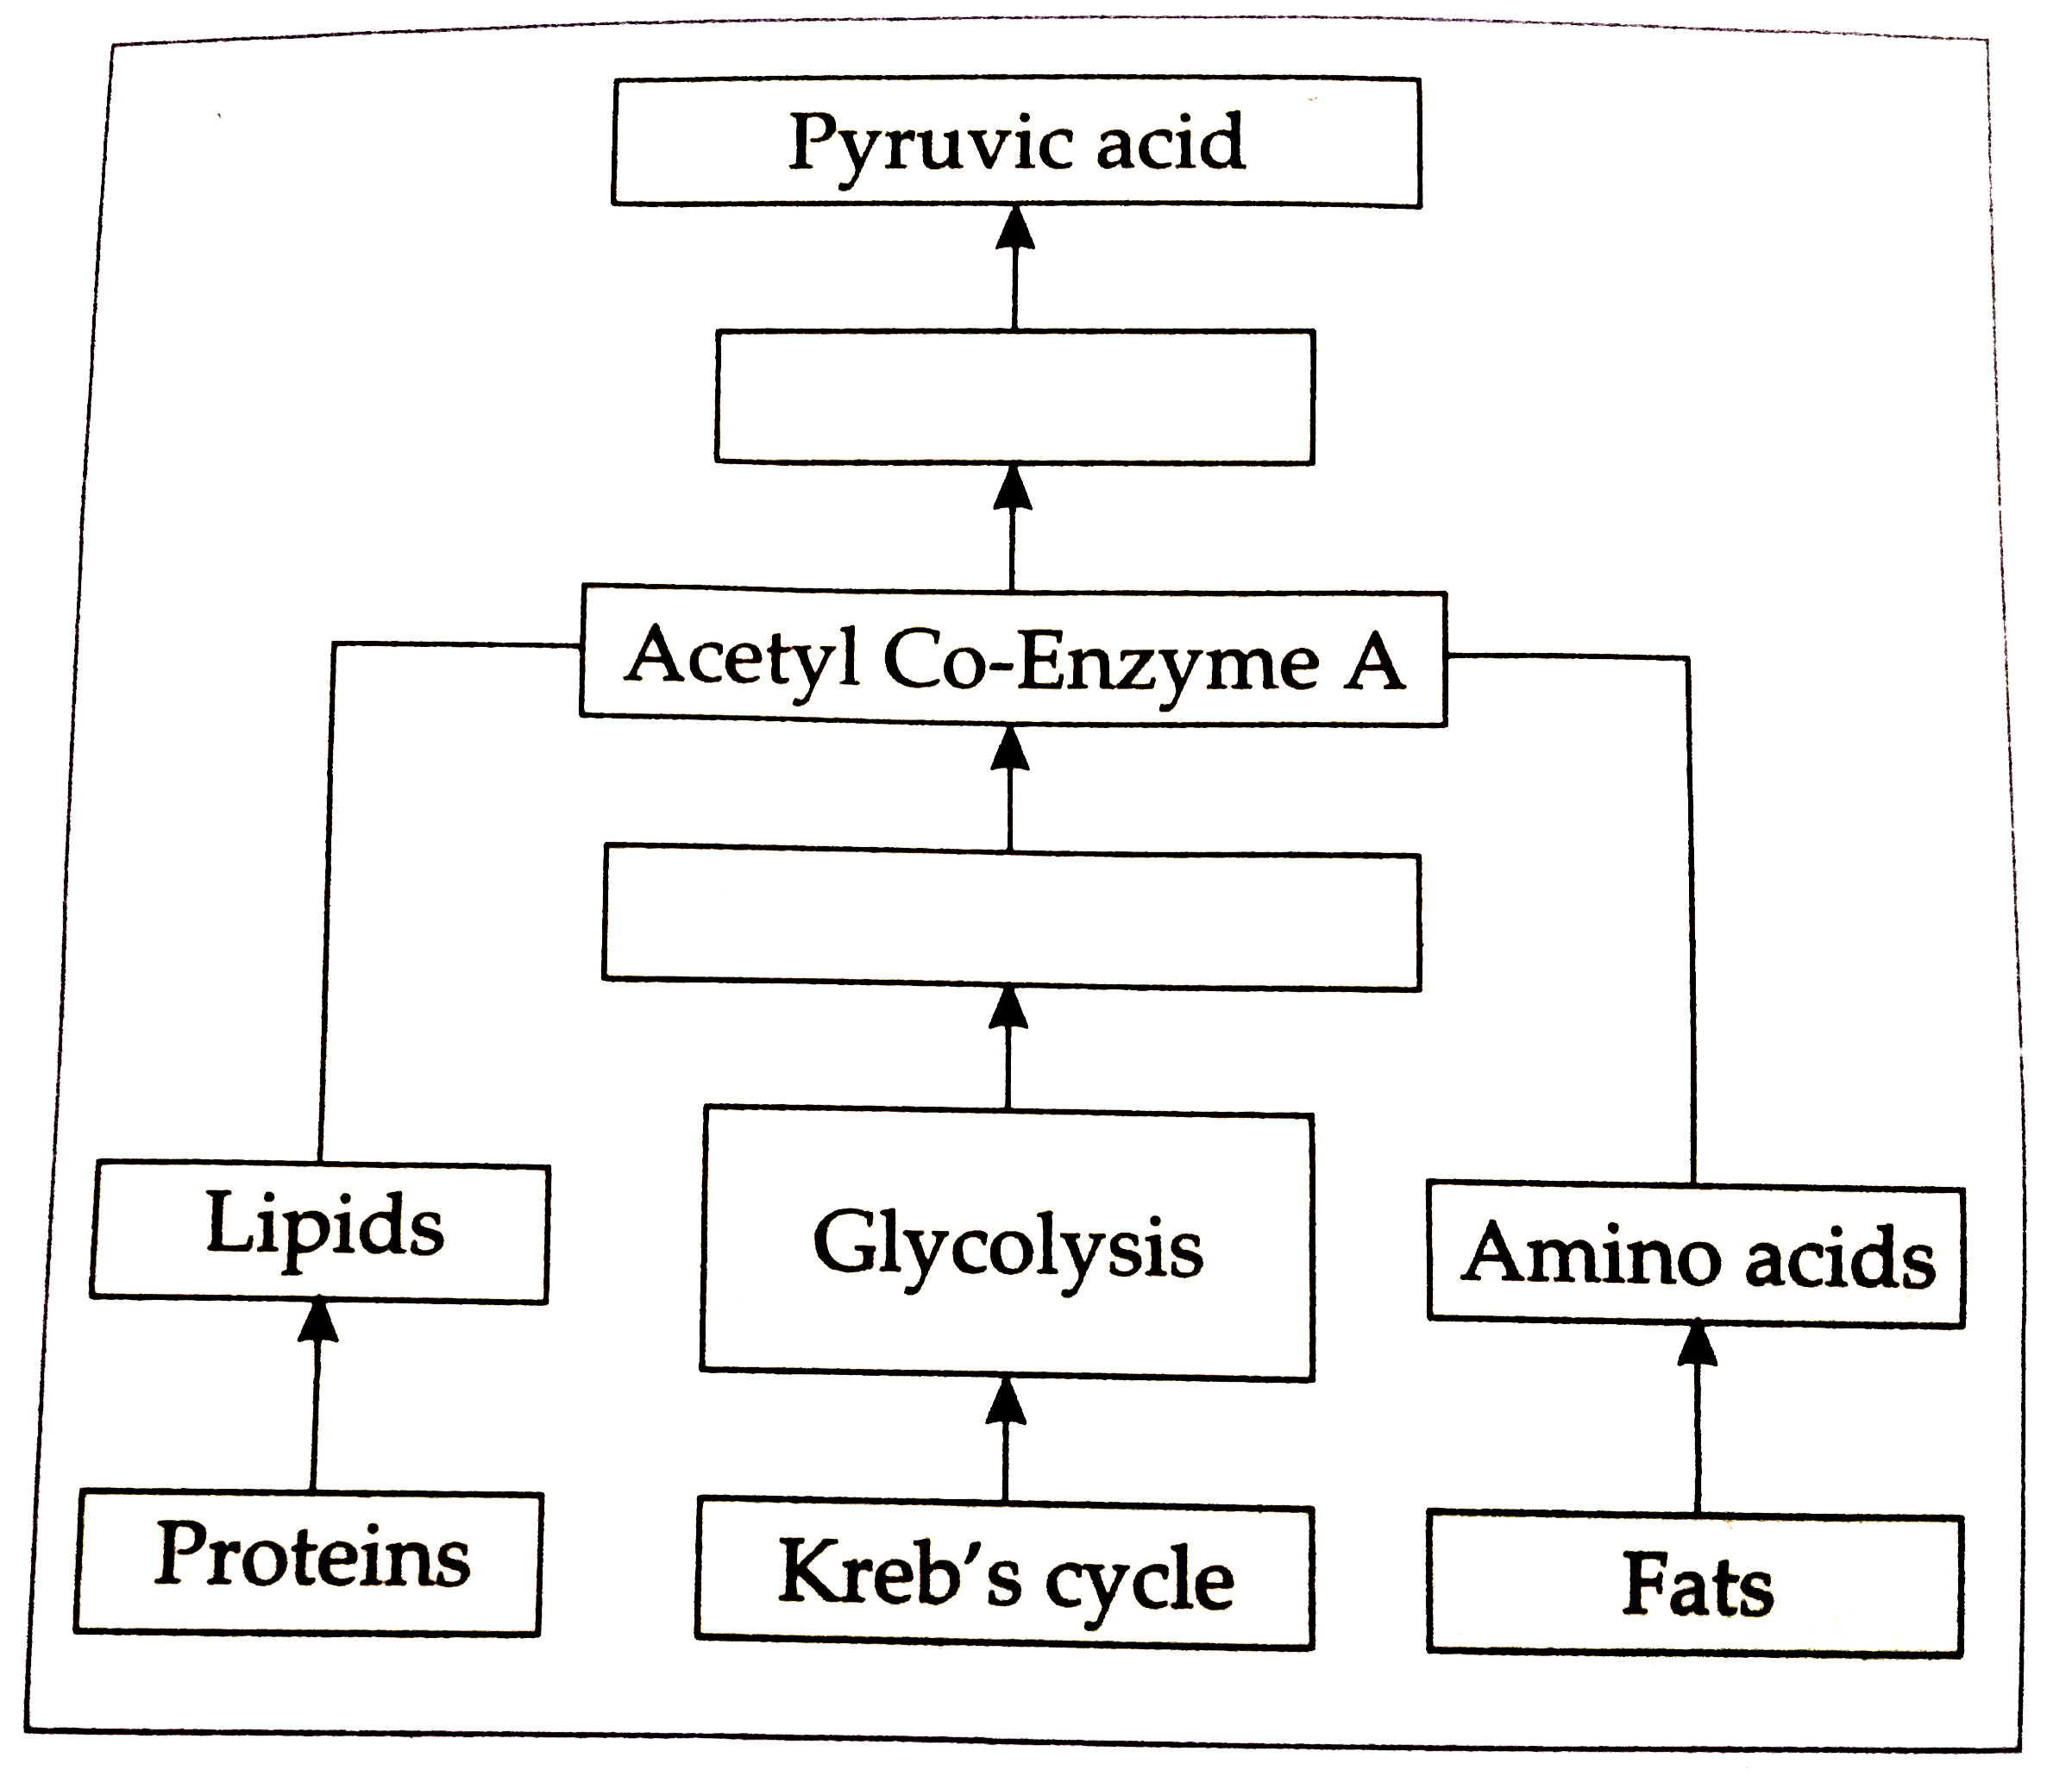 How energy is formed from oxidation of carbohydrates , fats and protein? Correct the diagram given below.